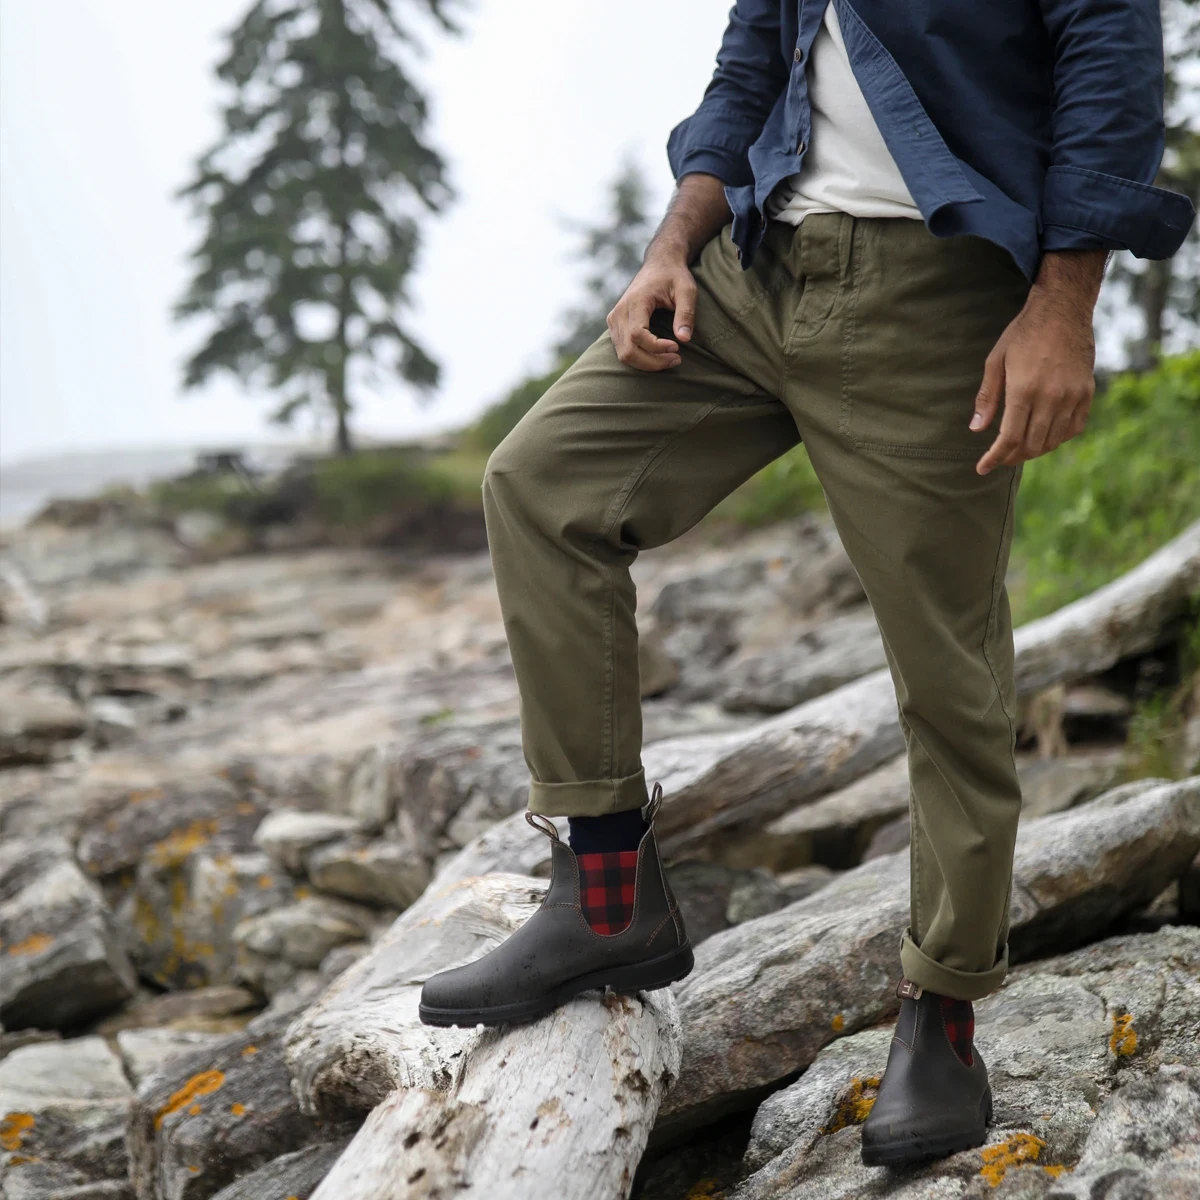 Blundstone and L.L.Bean’s Boot Collaboration for Hiking Boots Featured on Refinery 29